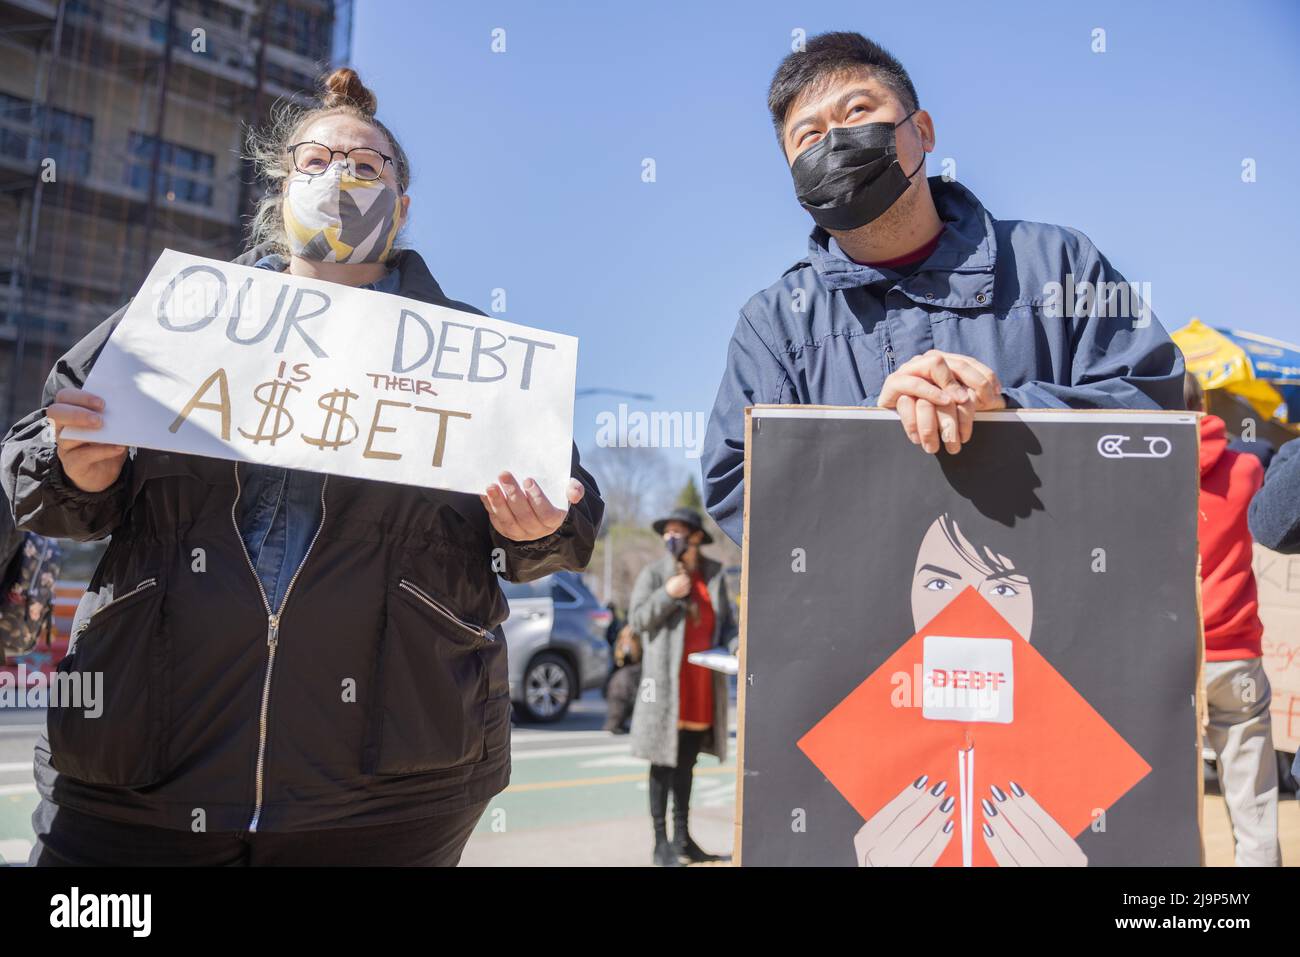 BROOKLYN, N.Y. – April 3, 2021: Demonstrators protest near Grand Army Plaza during a rally to cancel student loan debts. Stock Photo